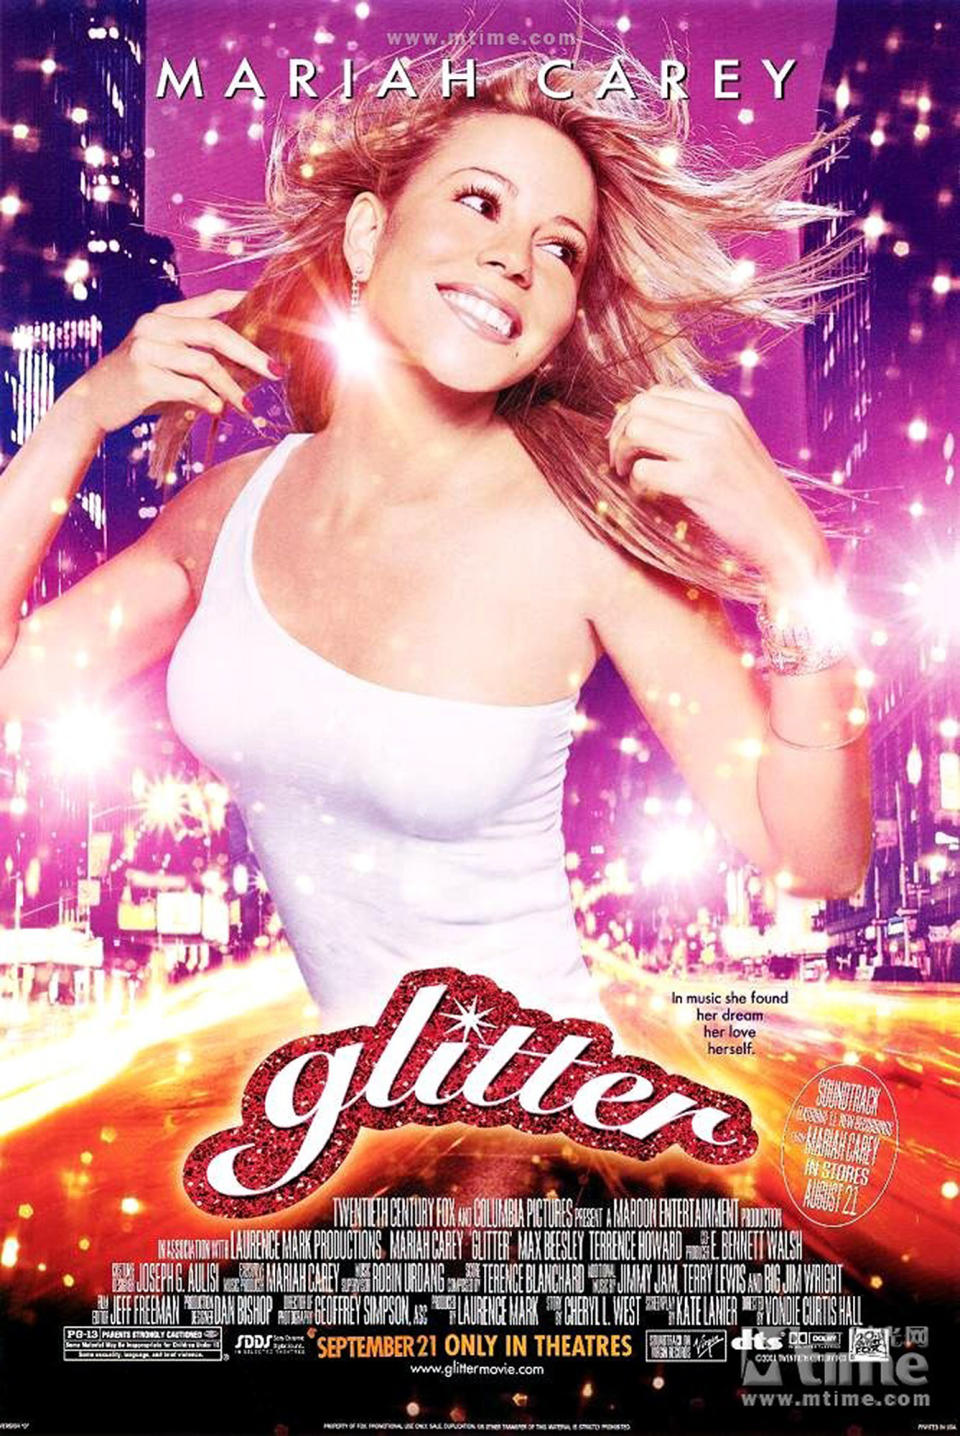 <p>The singer's loyal fanbase — the Lambily — were the force behind #JusticeForGlitter, which got the <em>Glitter</em> soundtrack to resurface at the top of the iTunes Top 10 albums chart in 2018. The stunning feat shocked Carey, who said<a href="https://people.com/music/mariah-carey-reacts-to-glitter-topping-chart/?xid=socialflow_twitter_peoplemag&utm_campaign=peoplemagazine&utm_source=twitter.com&utm_medium=social" rel="nofollow noopener" target="_blank" data-ylk="slk:the film "almost ruined my life.";elm:context_link;itc:0;sec:content-canvas" class="link "> the film "almost ruined my life."</a> She dished about the good news on <em>The Tonight Show Starring Jimmy Fallon</em> at the time, saying, "The fact that <a href="https://aax-us-east.amazon-adsystem.com/x/c/Qo4brTIbacFyRjvqqIUARA4AAAFnIsAI3wEAAAFKAfmvwFo/https://www.amazon.com/Glitter-Mariah-Carey/dp/B00005MAWM/ref=as_at?imprToken=PcSA2BCw.vXQyrdtKOhQTg&slotNum=0&ie=UTF8&camp=1789&creative=9325&linkCode=w61&creativeASIN=B00005MAWM&tag=people0d0-20&ascsubtag=dea905b24c5537ec2abaa8424cdbb9c7" rel="sponsored noopener" target="_blank" data-ylk="slk:Glitter;elm:context_link;itc:0;sec:content-canvas" class="link "><em>Glitter</em></a> even came back is a thing. Whoever thought it was going to get to No. 1, all these years later?" </p> <p>"But it is a good album and the fans made it happen," Carey told Fallon. "I had nothing to do with it. The Lambily got behind it. … it's a movement, it's bigger than me."</p> <p>The comeback meant even more for the star, whose film was released on Sept. 21, 2001 — 10 days after the terrorist attacks on New York City's World Trade Center, Washington, D.C.'s Pentagon and Pennsylvania's Somerset County. Sept. 11, 2001 was also the day the <em>Glitter</em> soundtrack came out.</p> <p>The star said, "It was a tough time when it came out. It was a whole thing, it was a drama."</p>